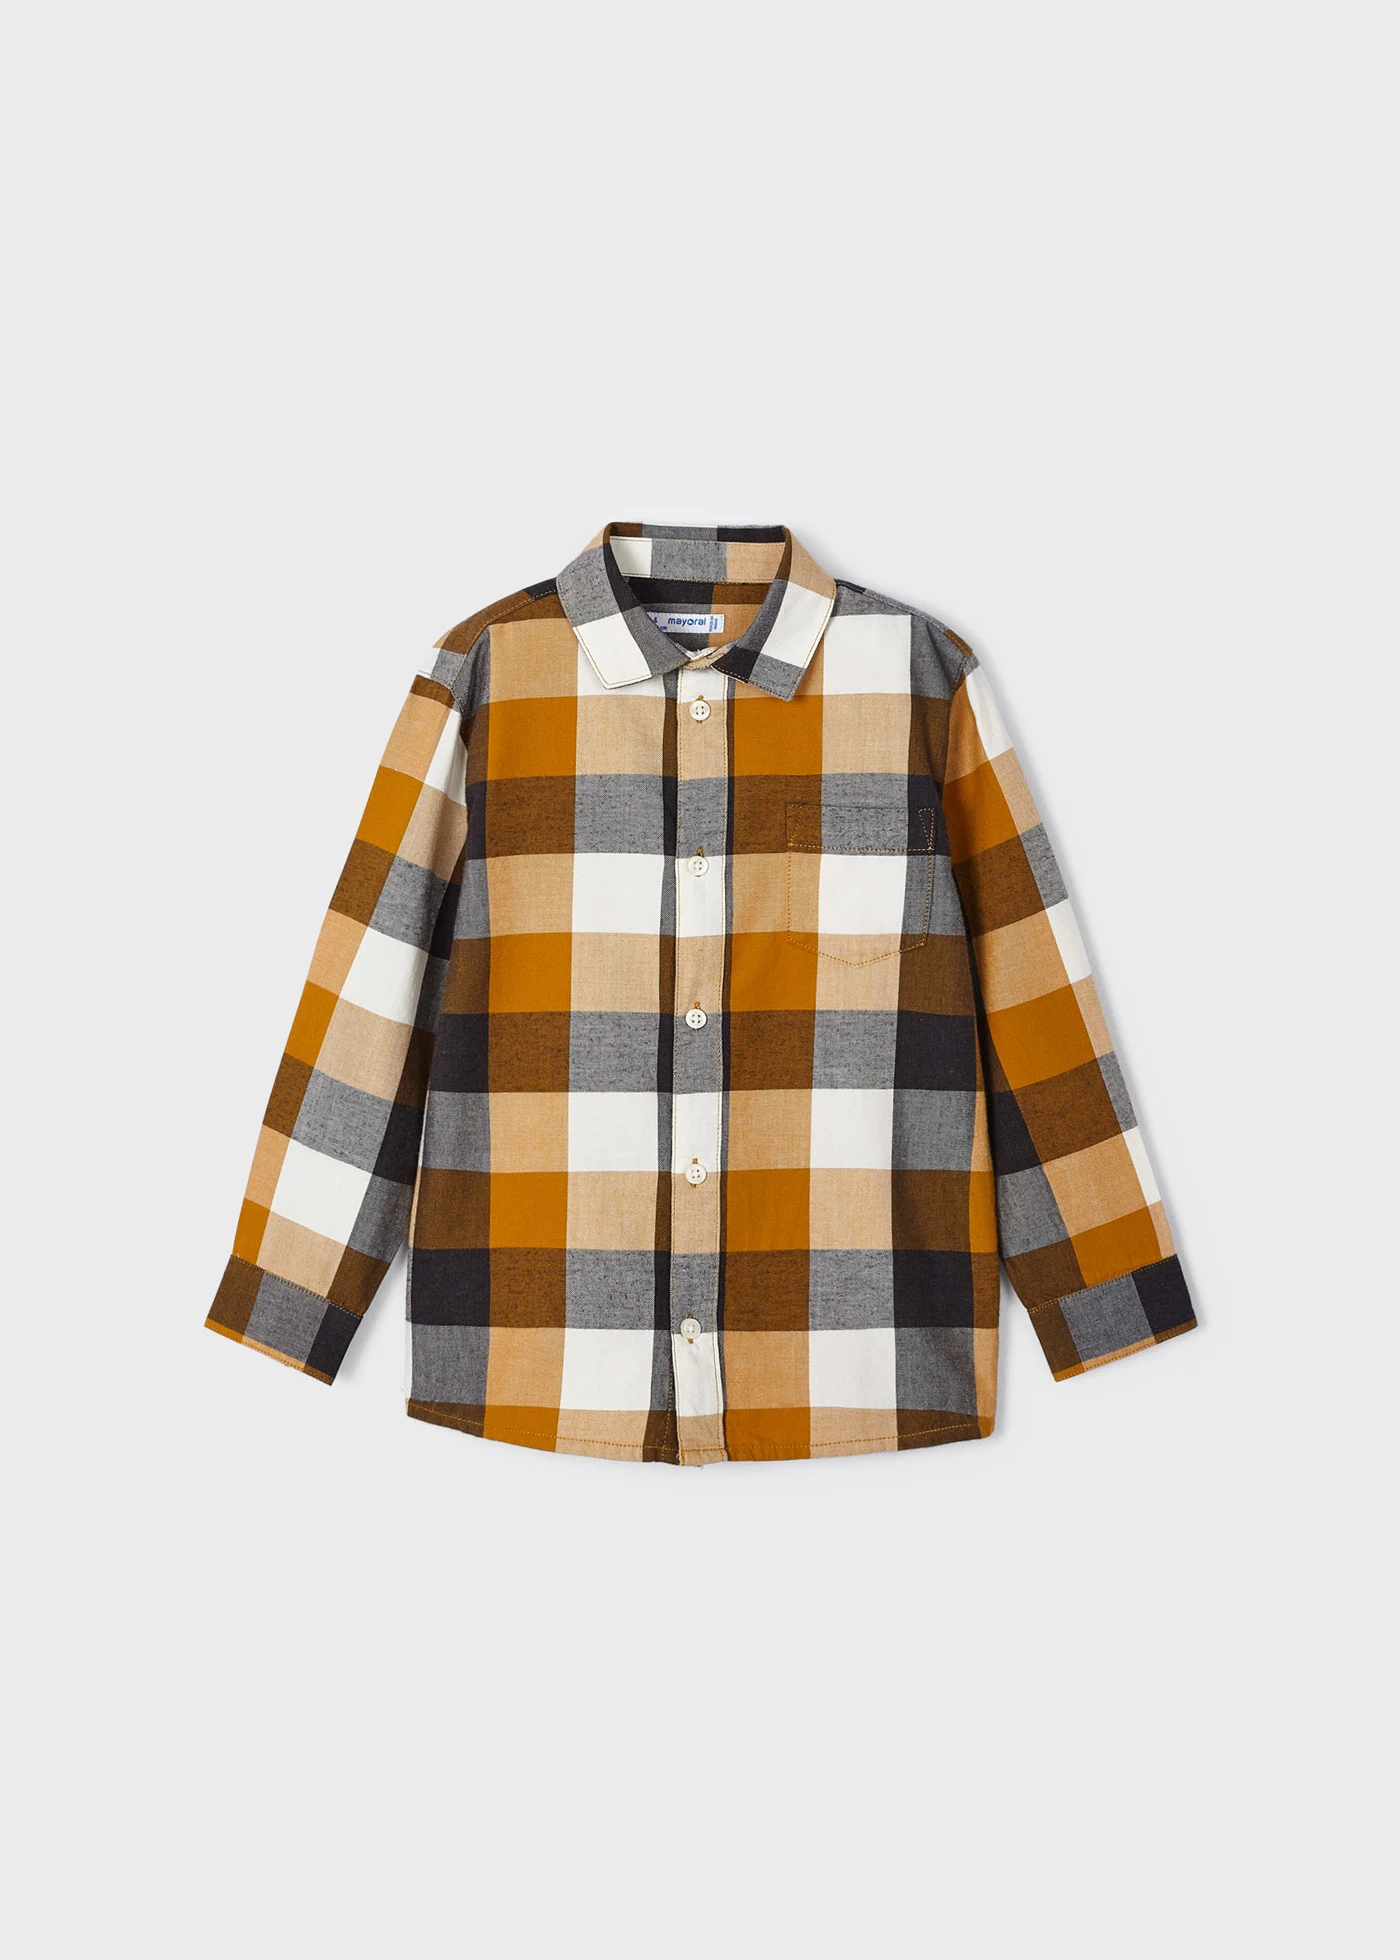 Mayoral L/S Checked Shirt Style 4111 - Ochre